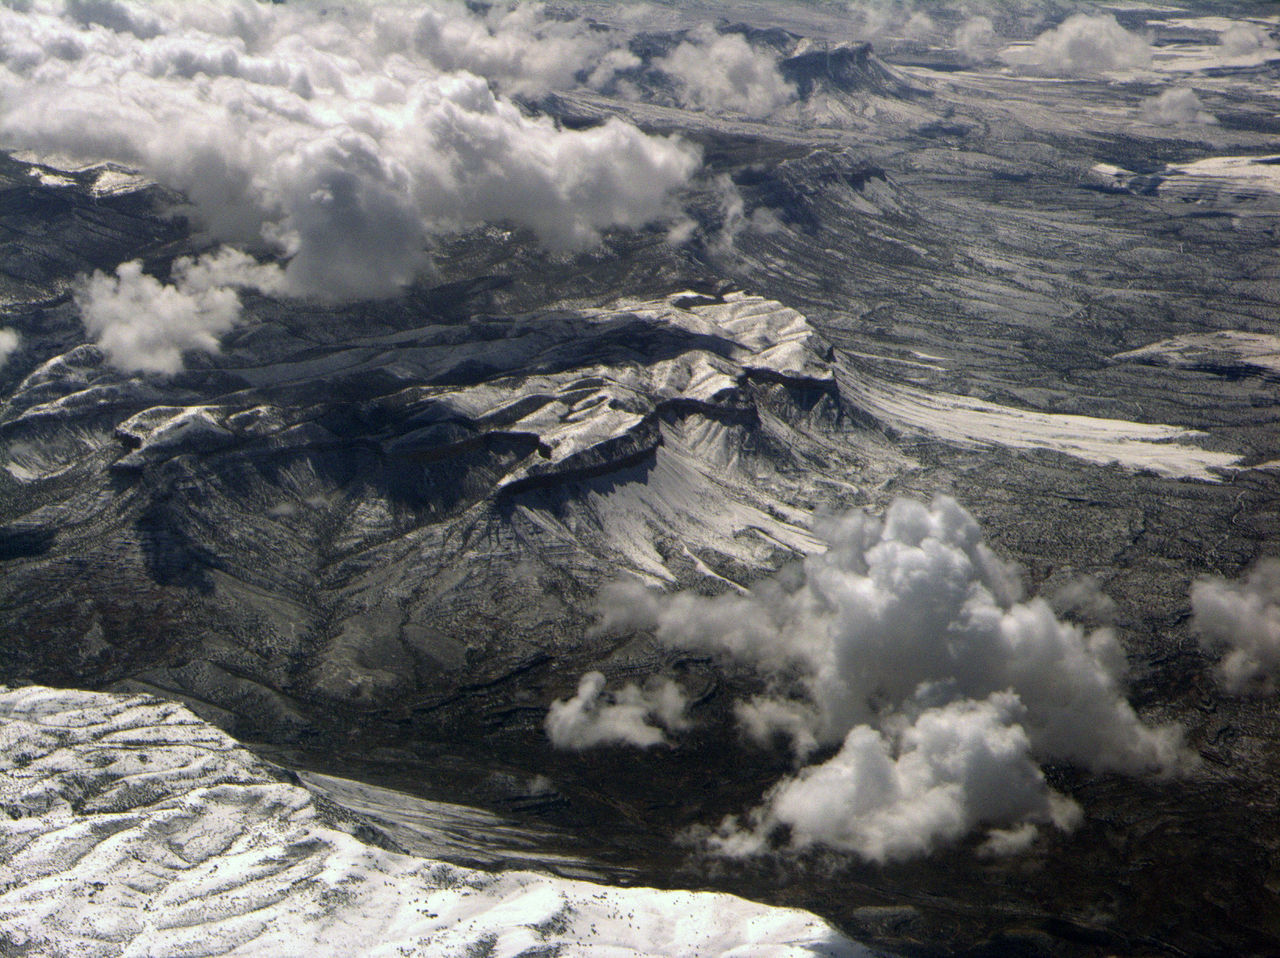 AERIAL VIEW OF SNOW CAPPED MOUNTAINS